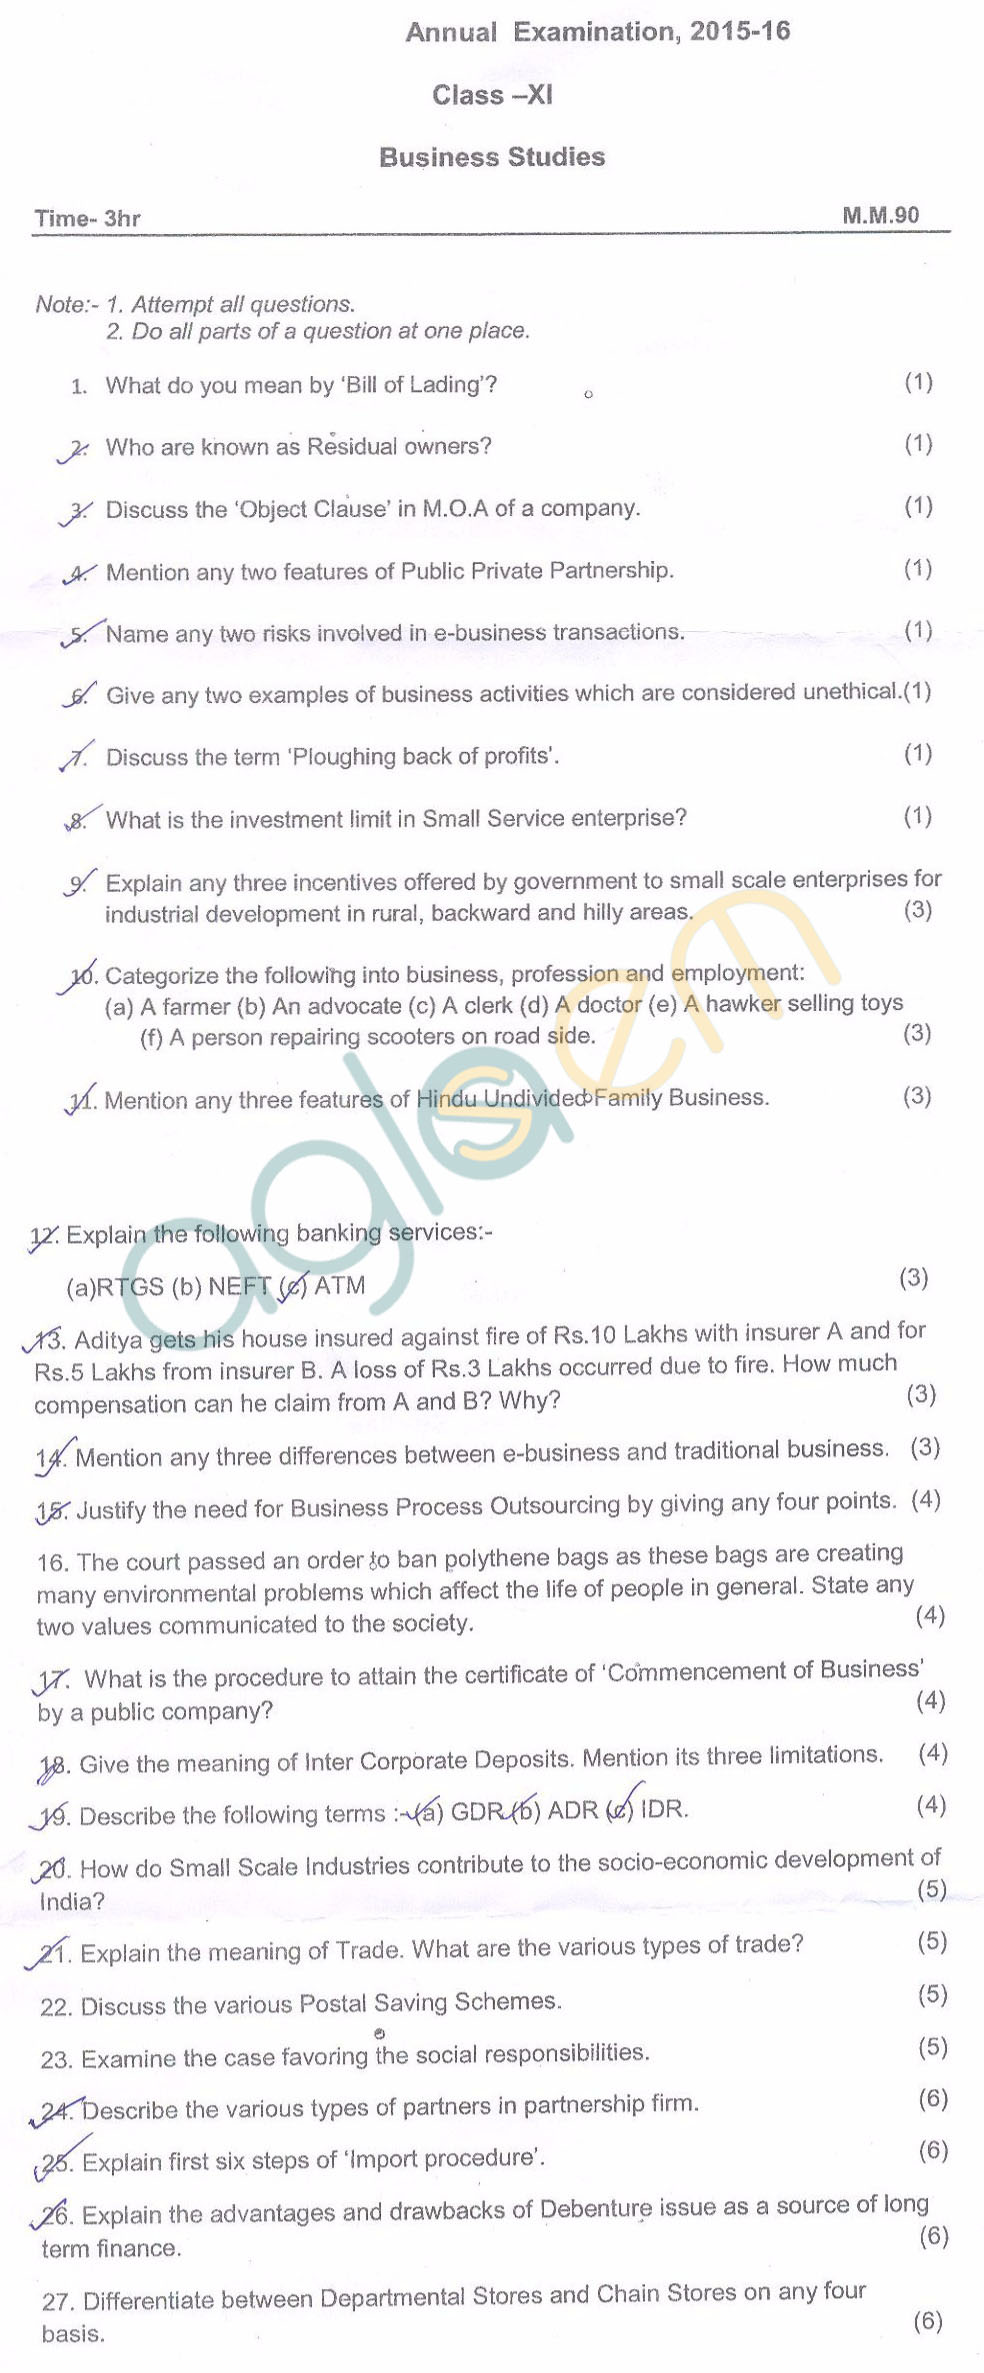 CBSE Class 11 Annual Exam Question Papers – Business Studies